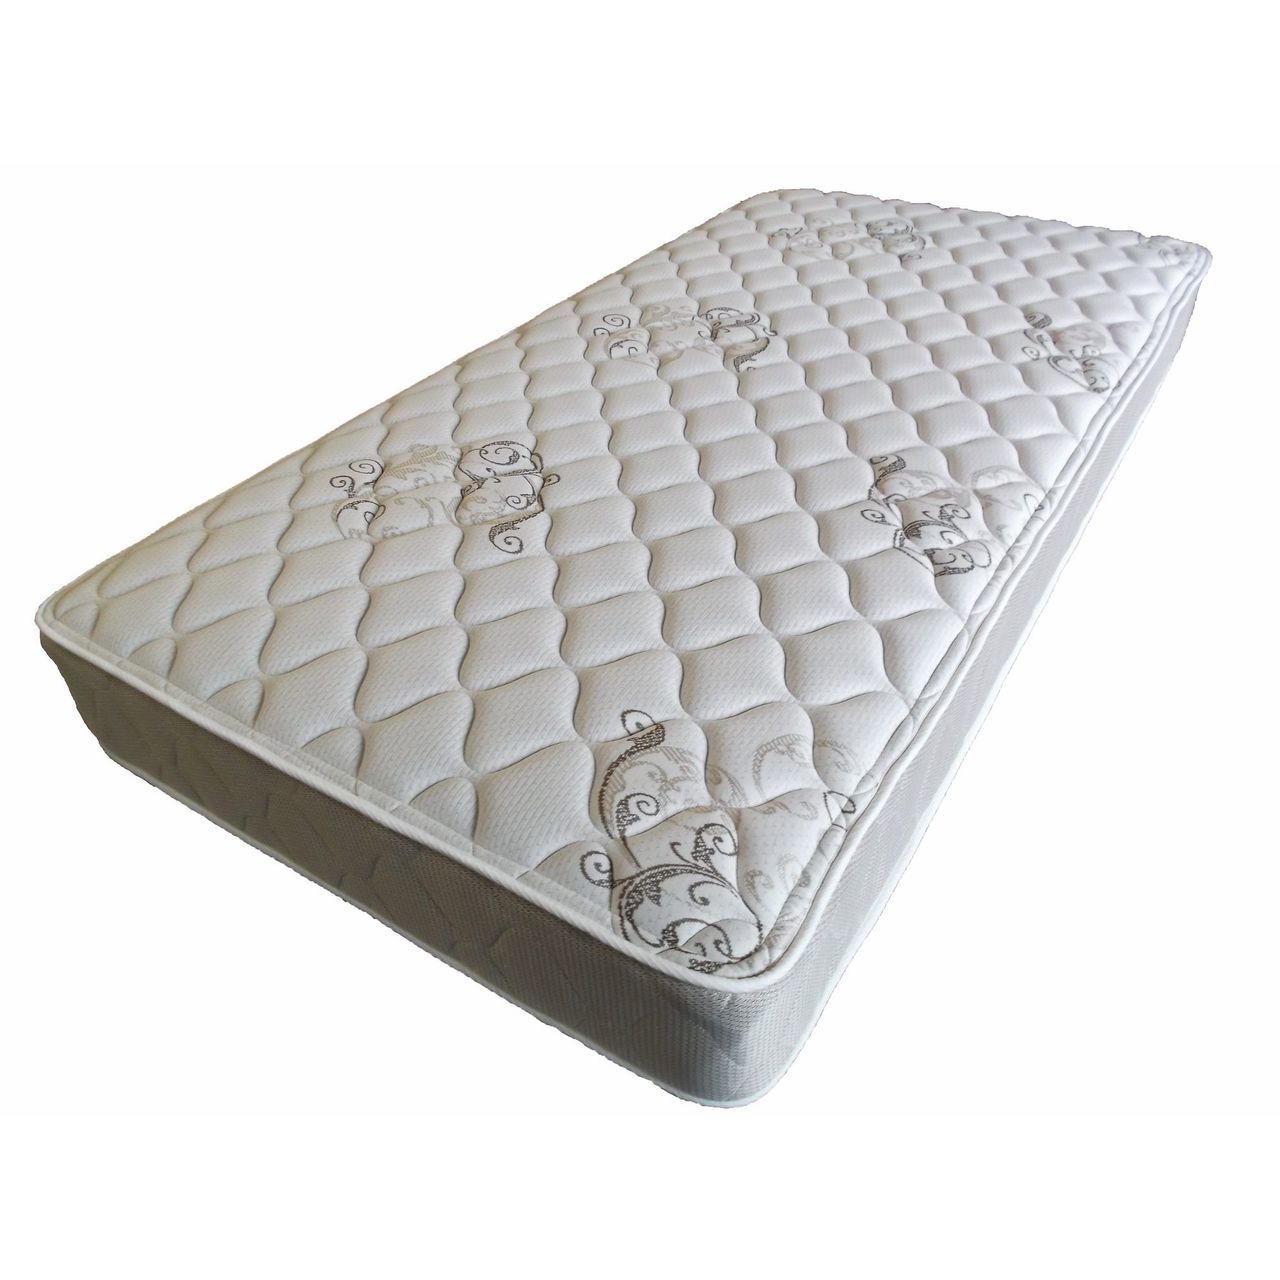 Twin Size Mattress Quality Comfort for a Restful Sleep